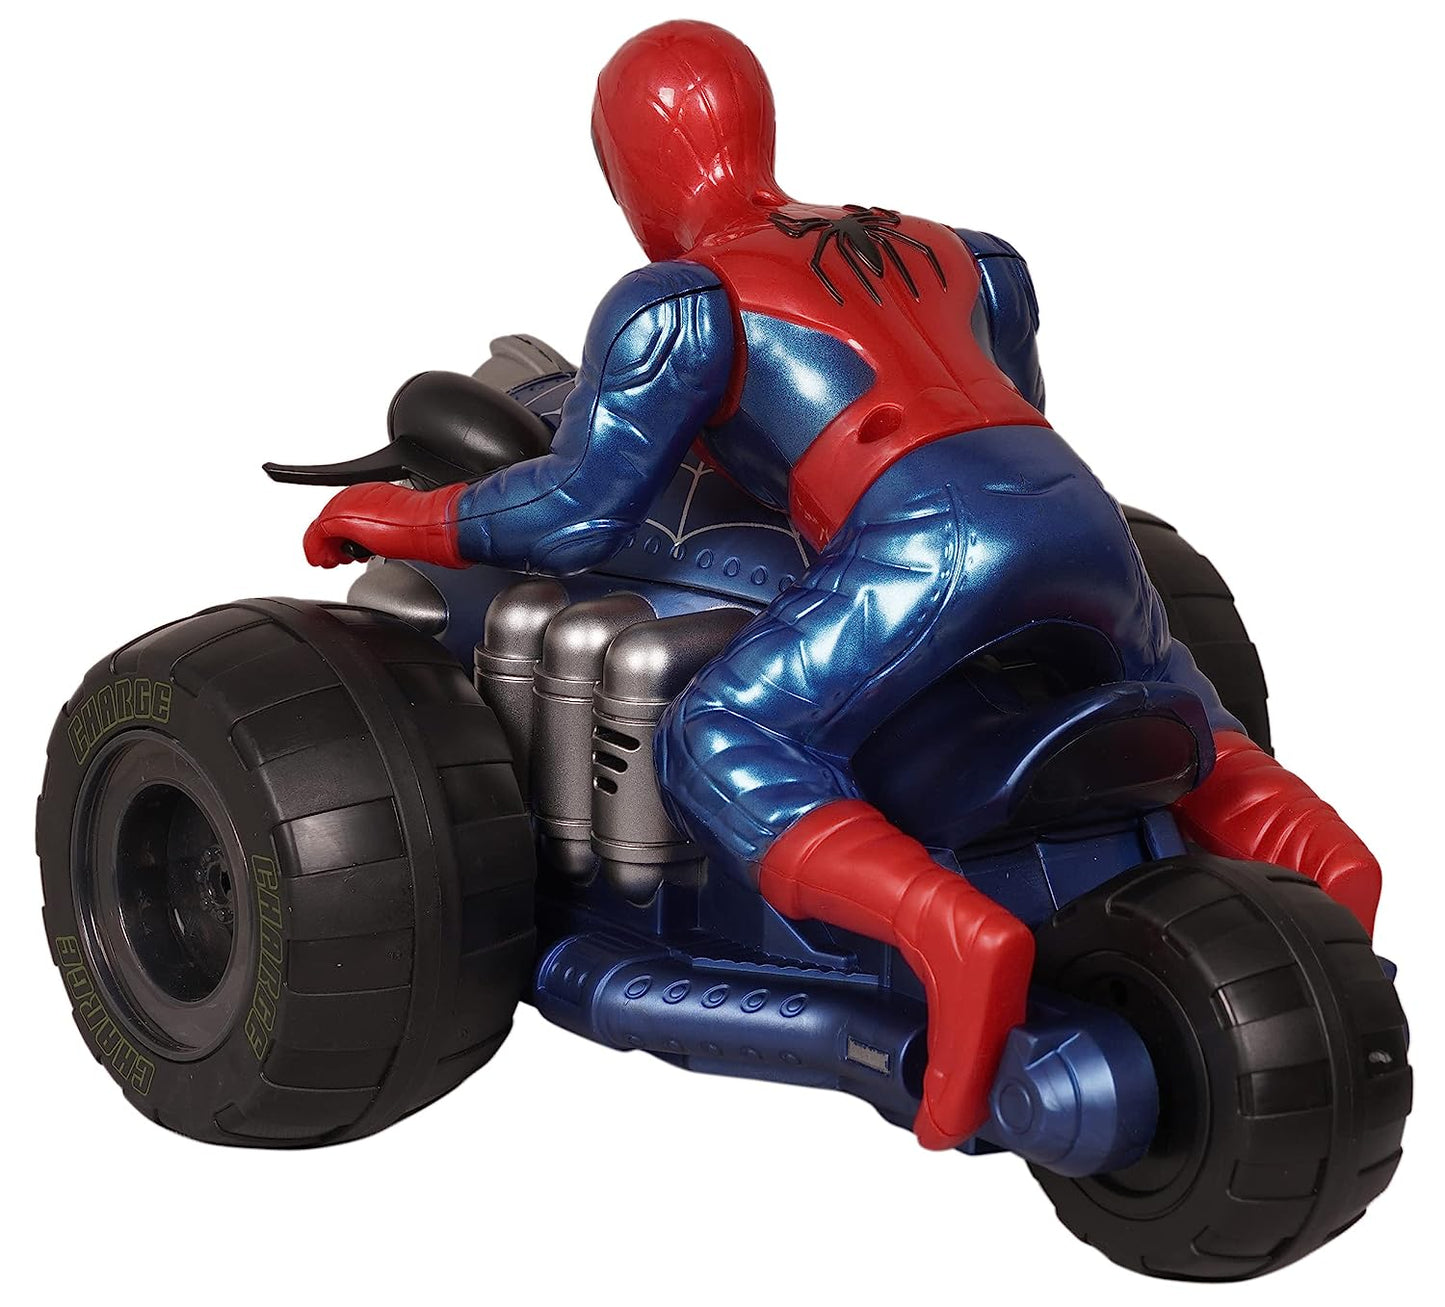 MM TOYS Stunt Spin Spiderman Motorcycle: Mesmerizing Light Effects, In-Built Music, Incredible Stunt & Drift Features - The Ultimate Drift Experience